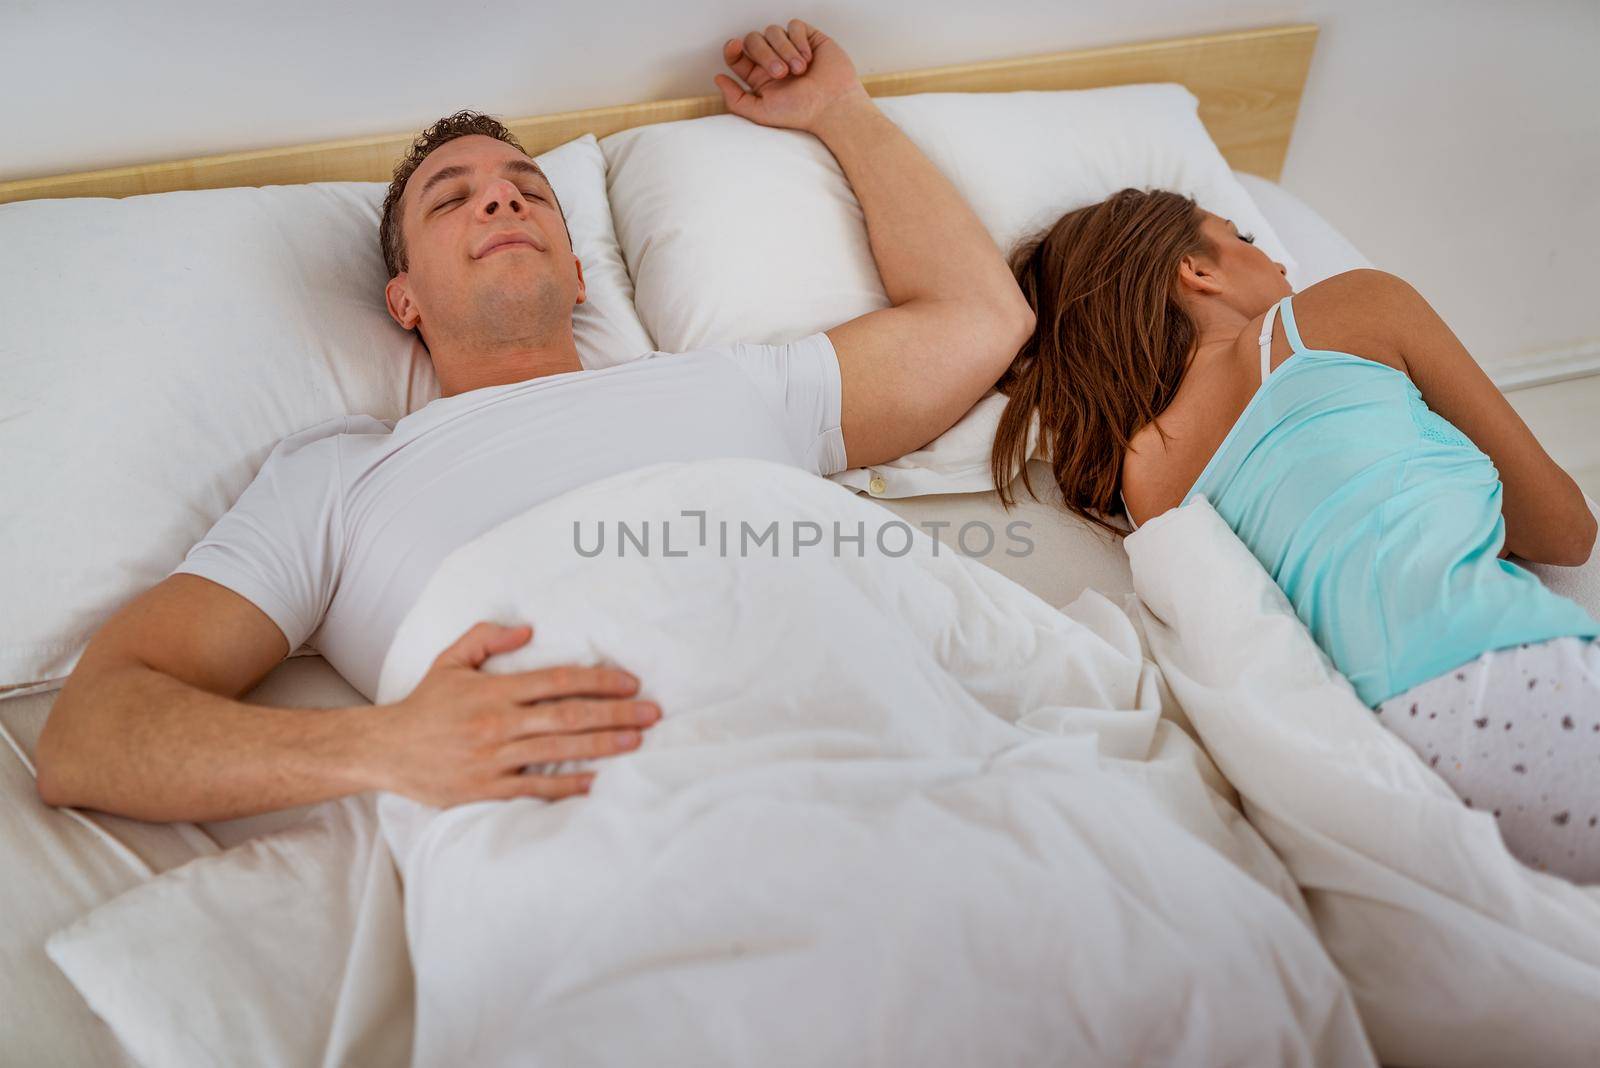 Beautiful couple sleeping together in bedroom. He sleeps relaxed and she is gathered at the end of the bed uncovered.